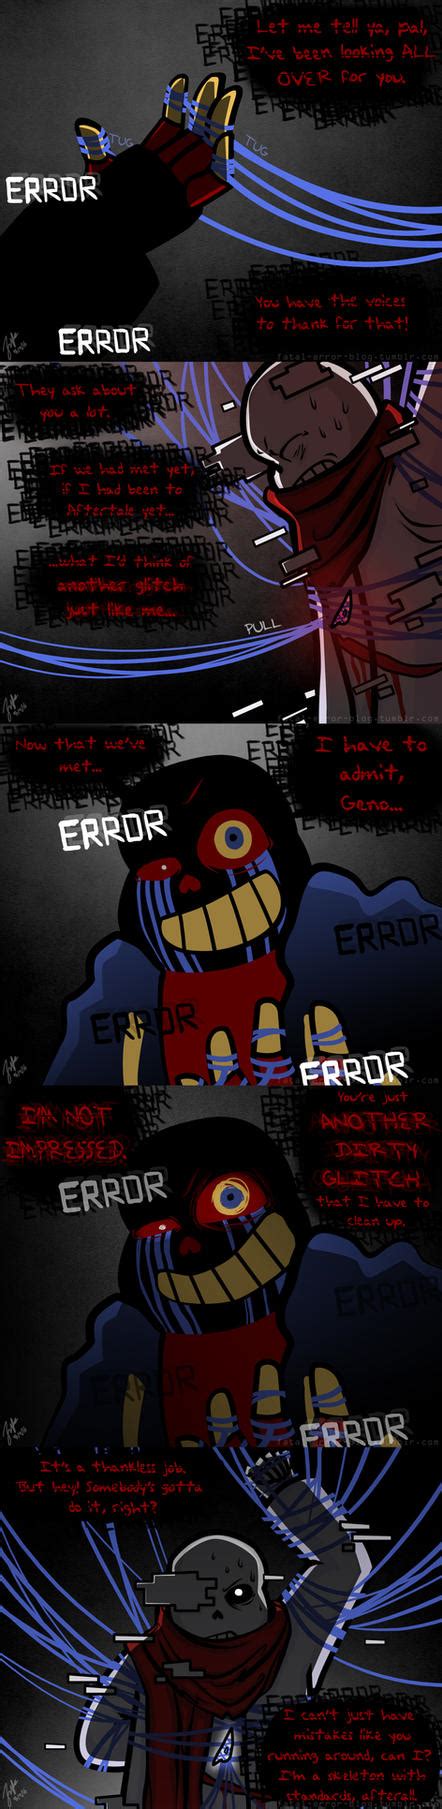 A Fatalerror Has Occurred The Beginning Part 2 By Xedramon On